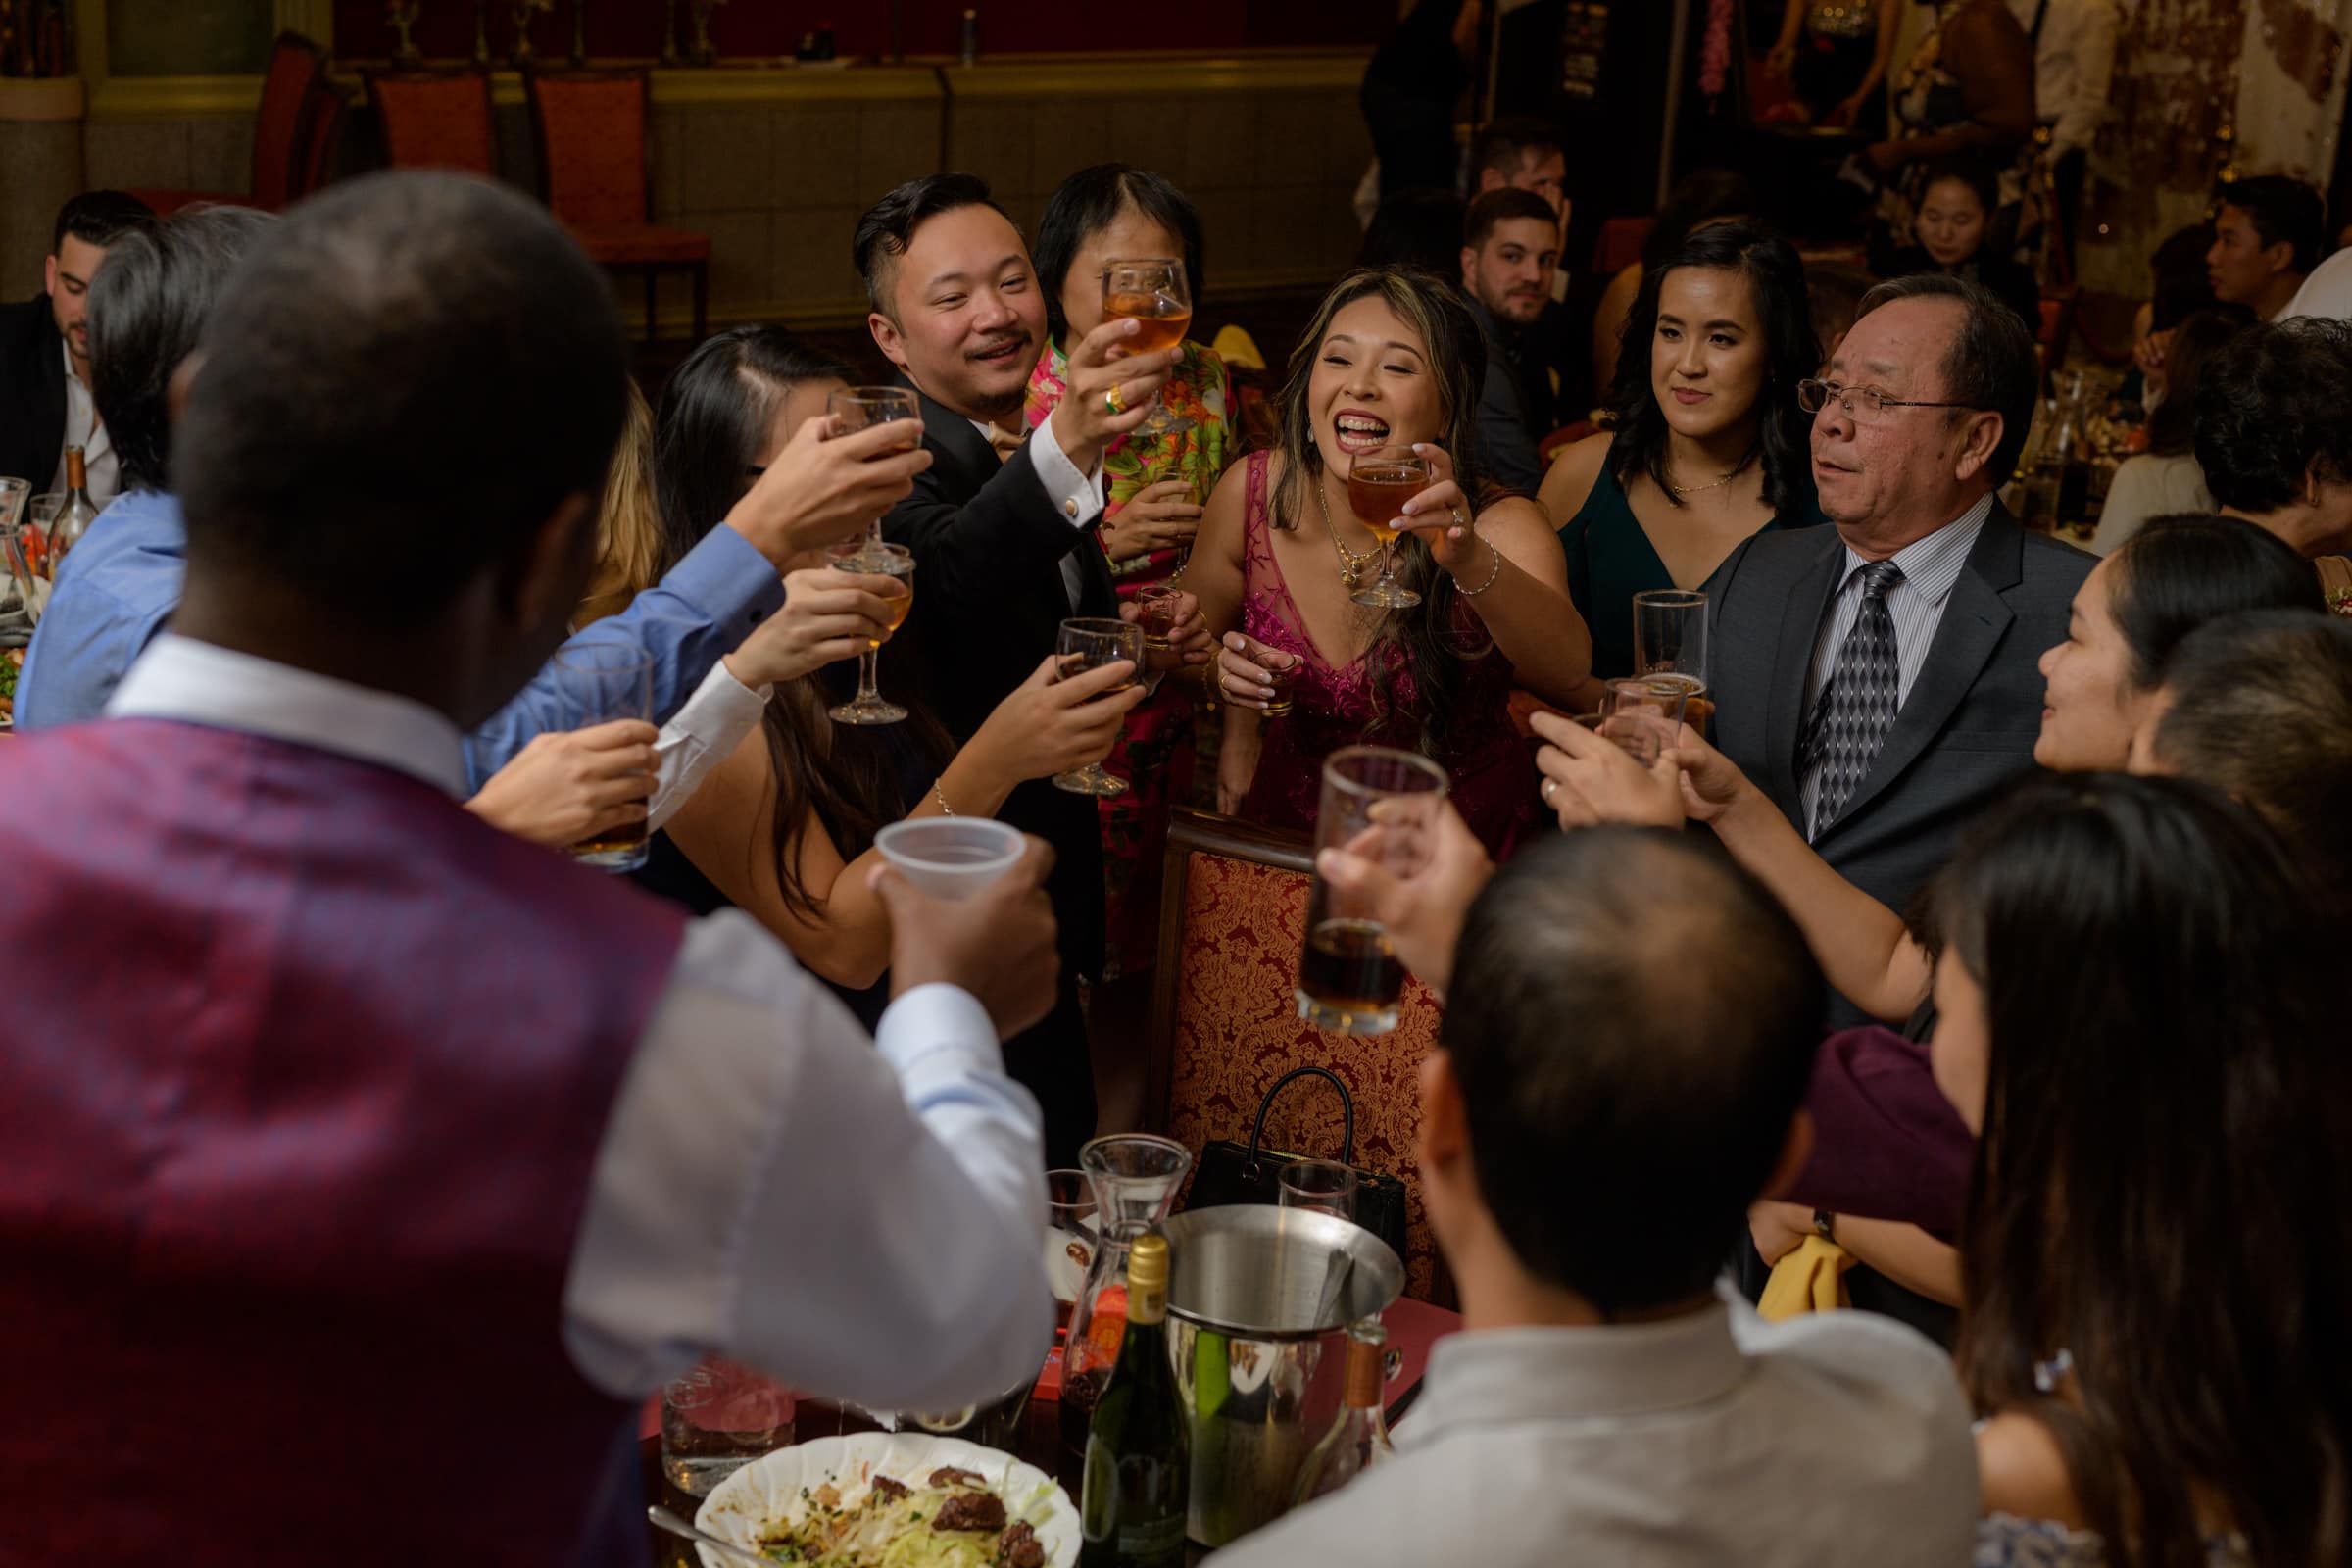 Chinese wedding tradition, drinks with every table, cheers, houston, texas, chinatown